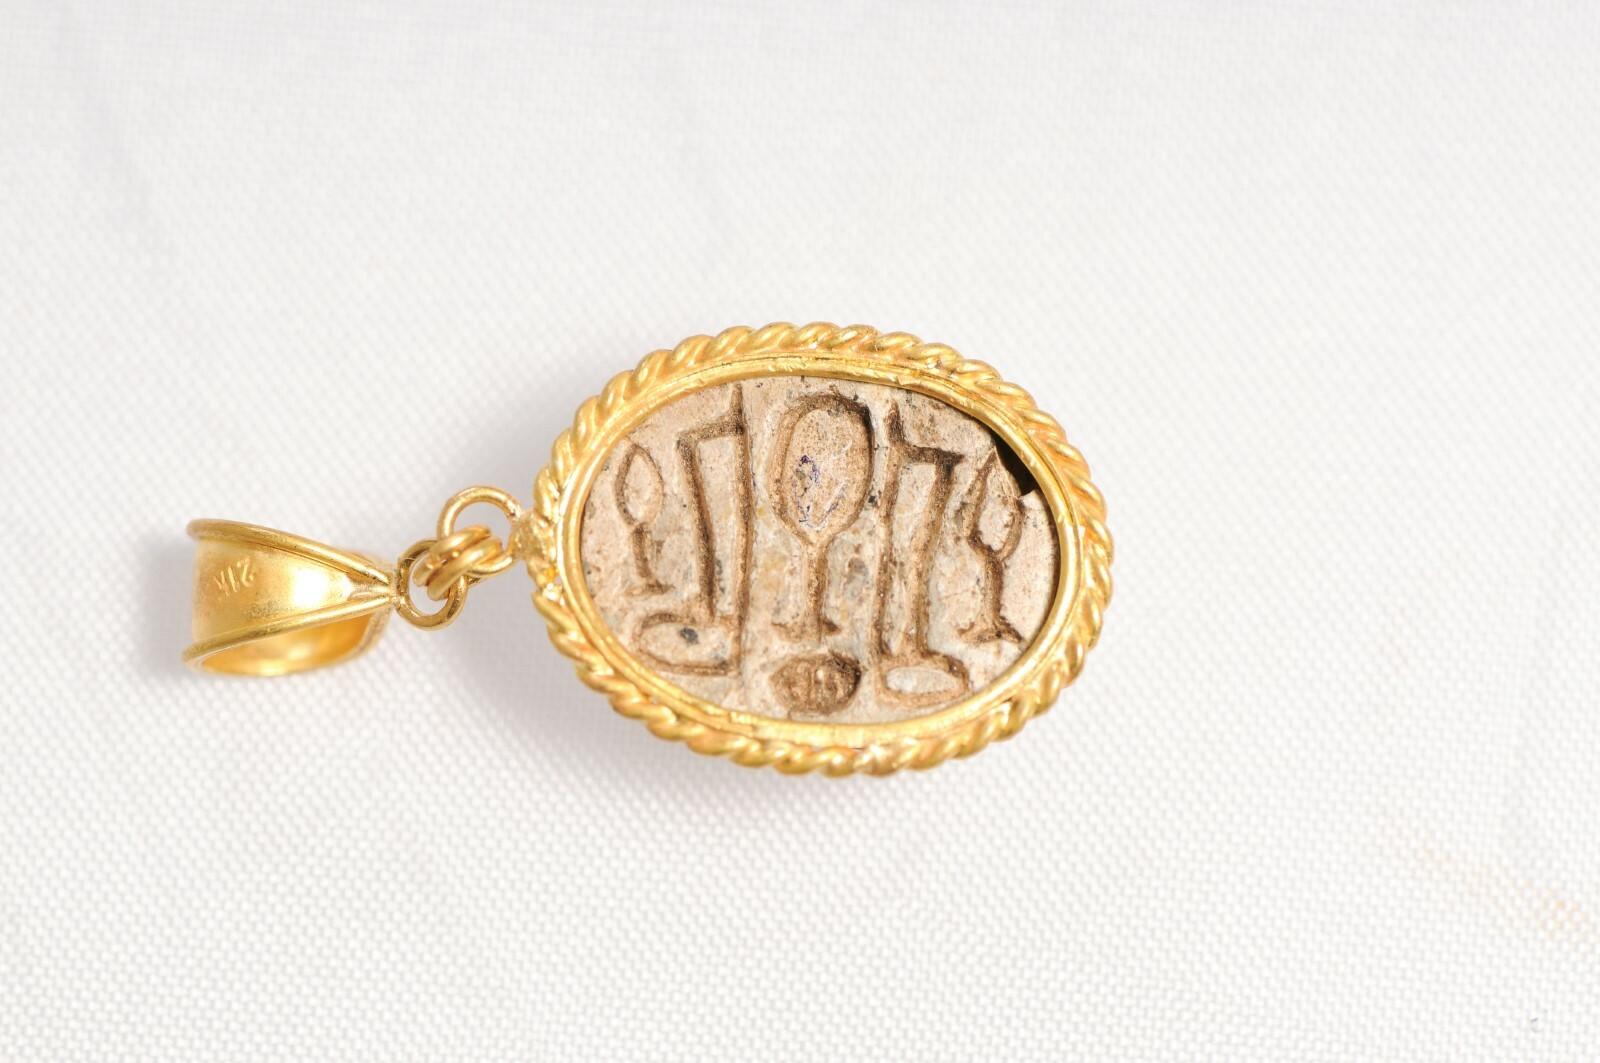 Egyptian Scarab w/ Seal Pendant in 21K gold In Excellent Condition For Sale In Atlanta, GA